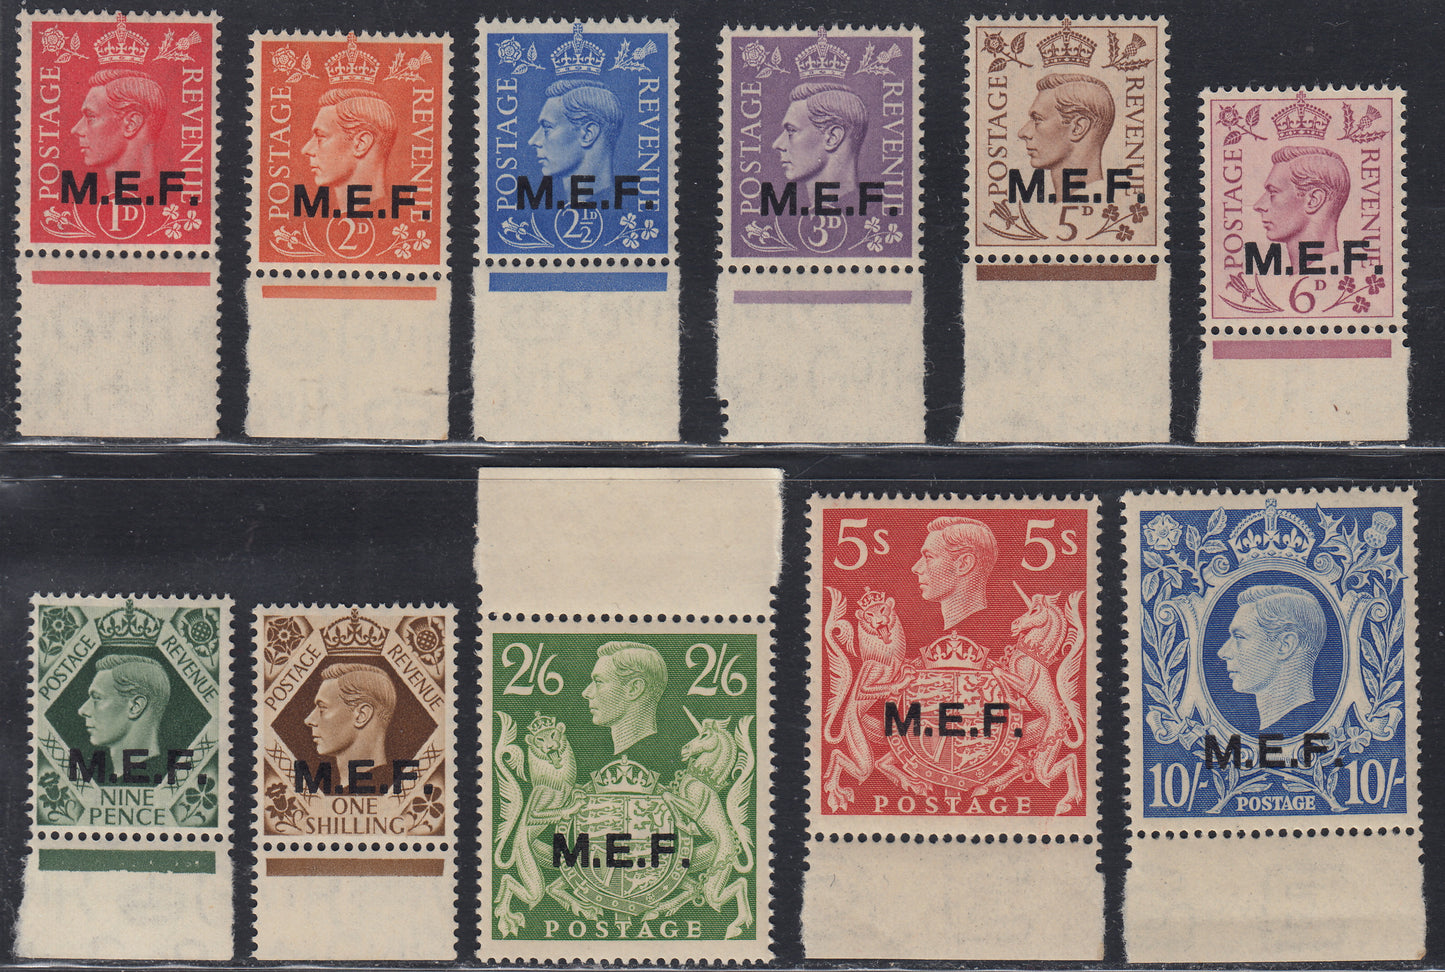 MEF3 1943/47 - Stamps of Great Britain, effigy of George VI overprinted MEF London edition, new with intact gum (6/16)